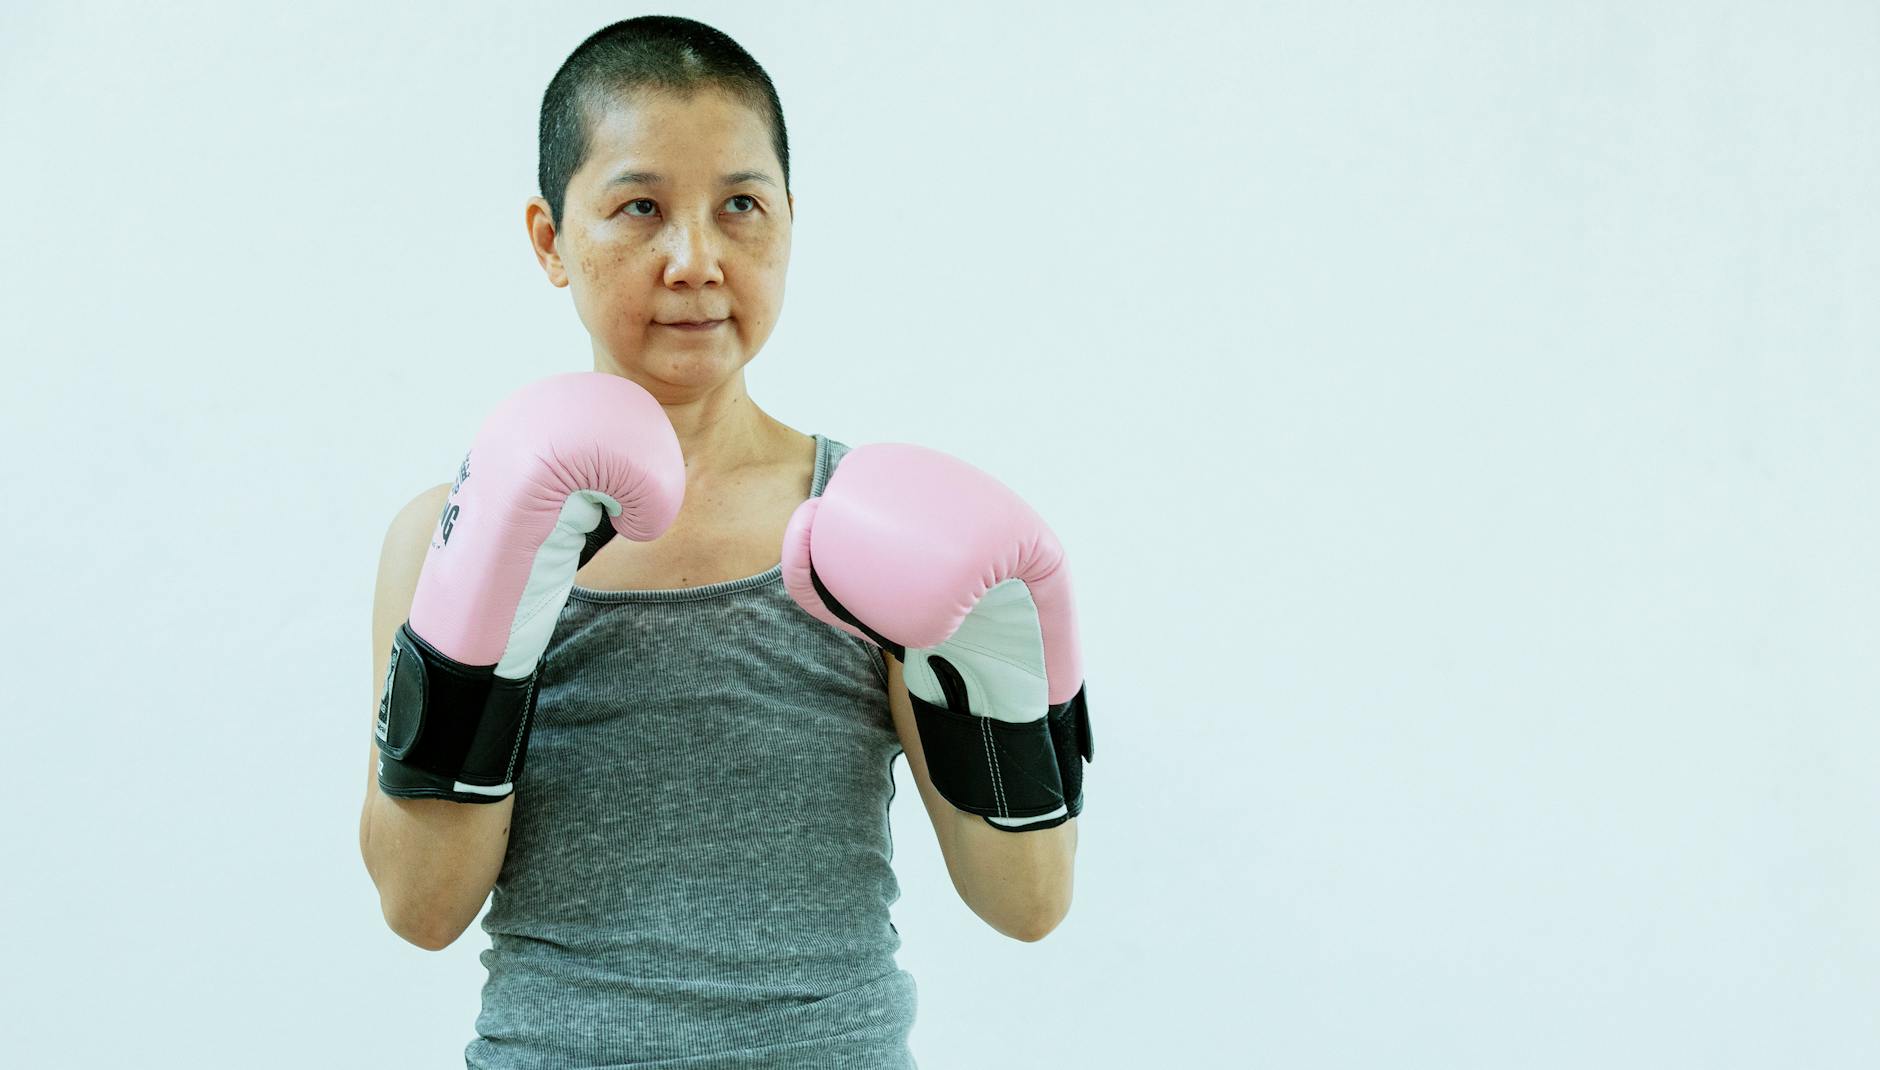 Confident middle age ethnic woman wearing casual outfit and pink boxing gloves while preparing to fight on white background in light studio